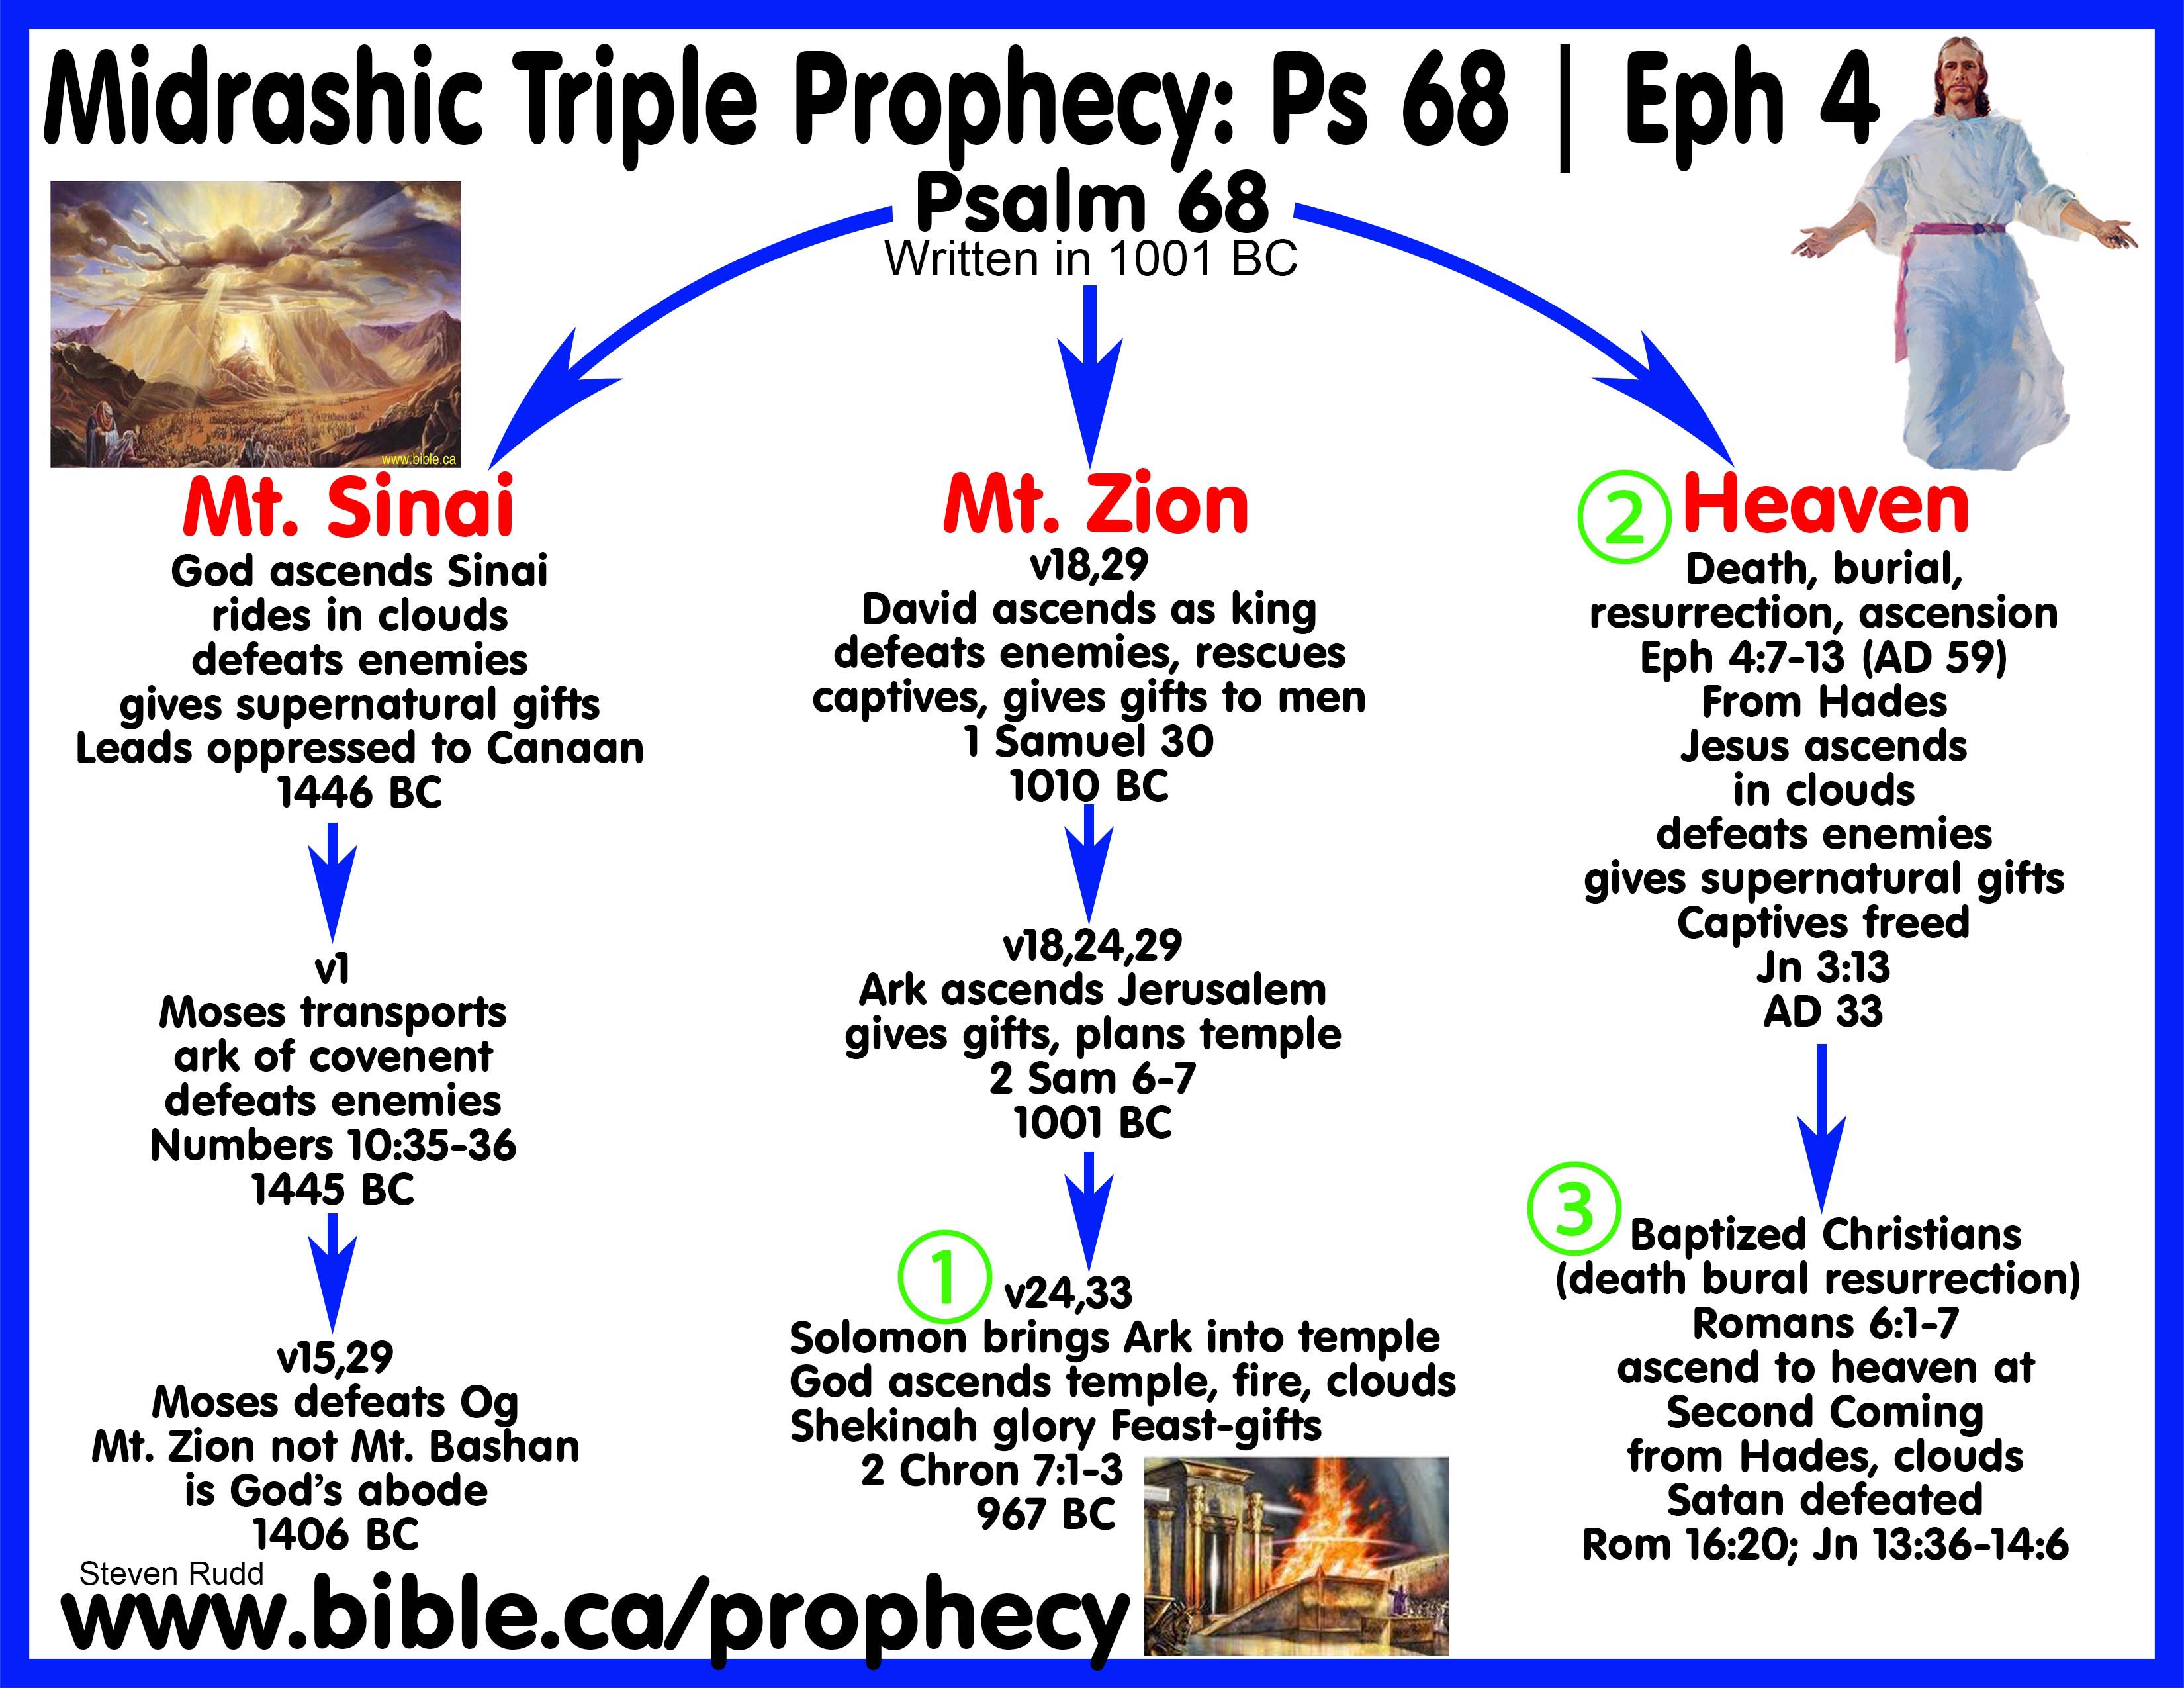 Bible Prophecy Fulfilled Chart